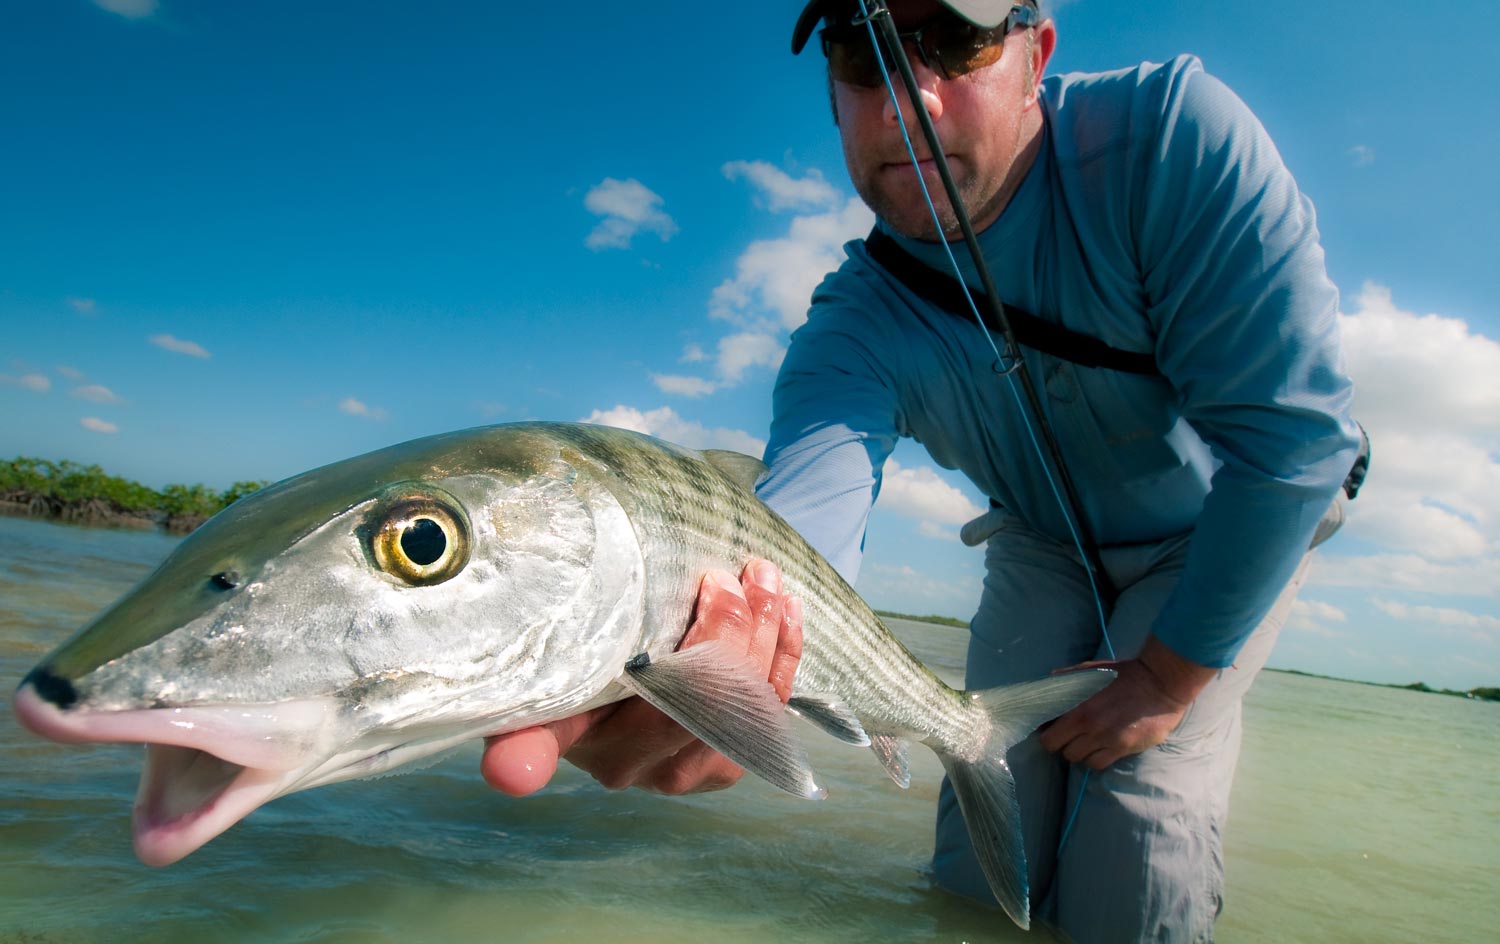 Using Two handed Rods For Striped Bass: By Daniel Wells – Thomas & Thomas